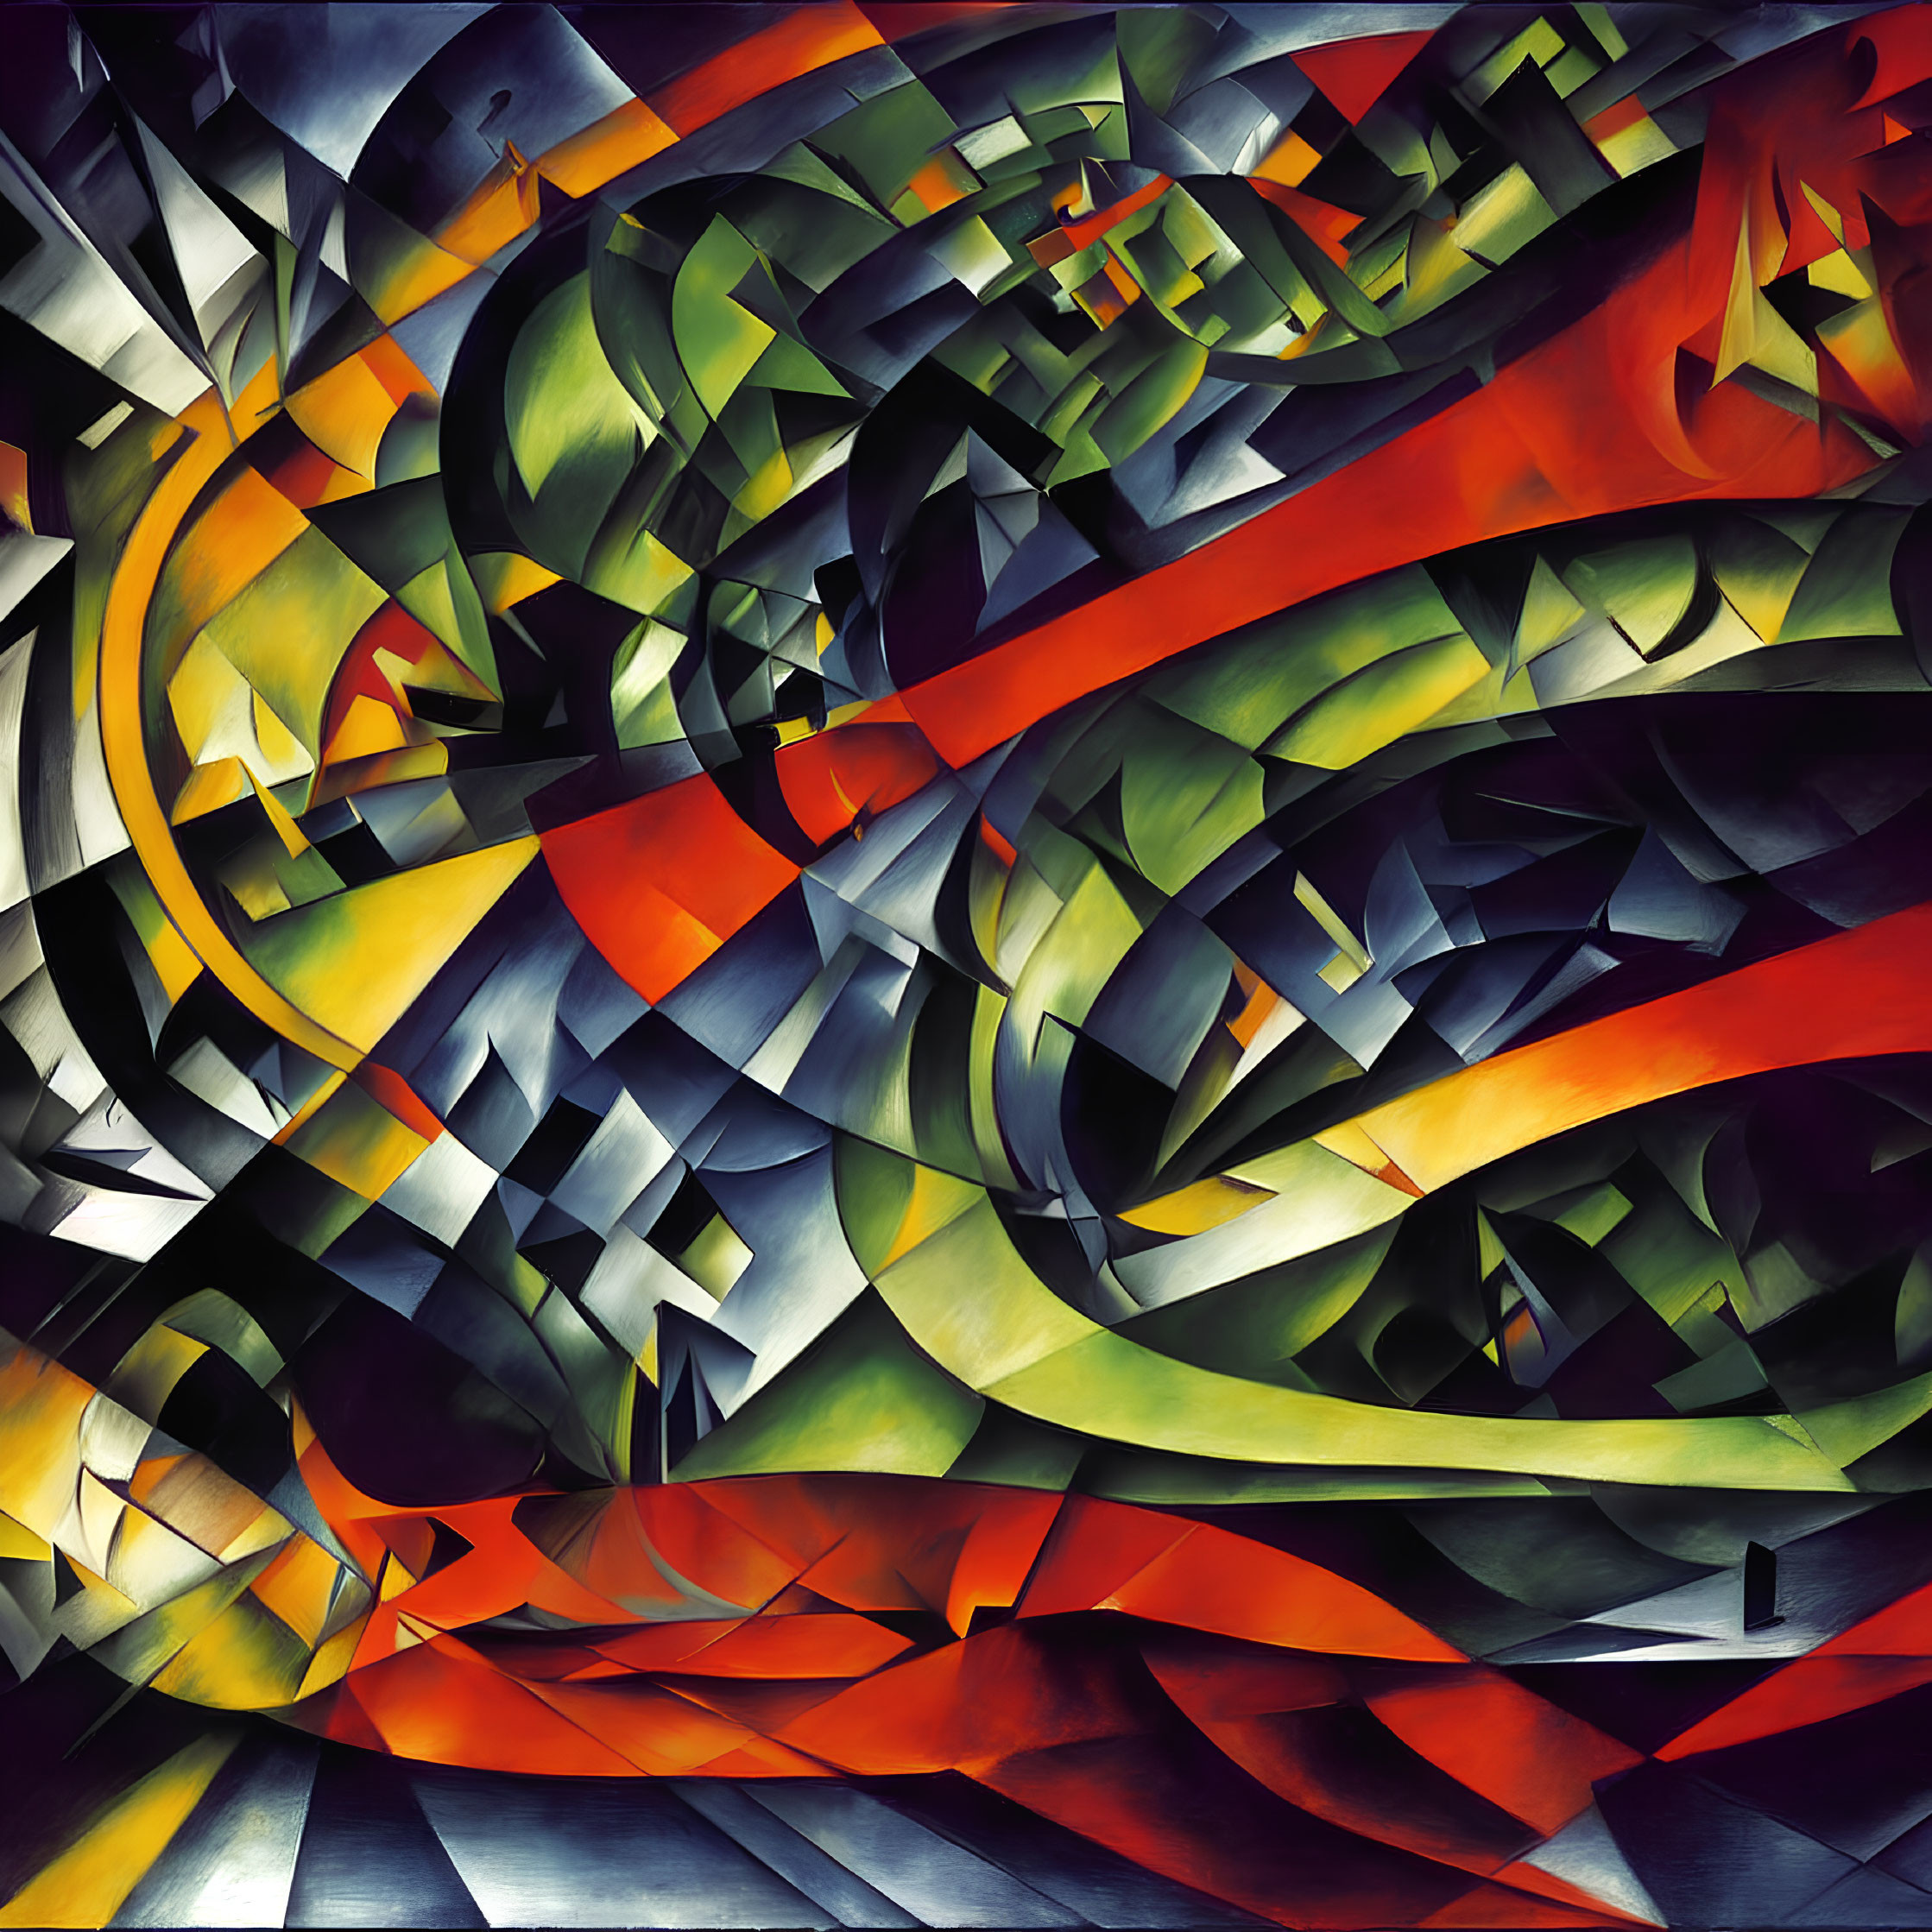 Colorful abstract geometric painting with swirling shapes and sharp angles in red, green, yellow, and black